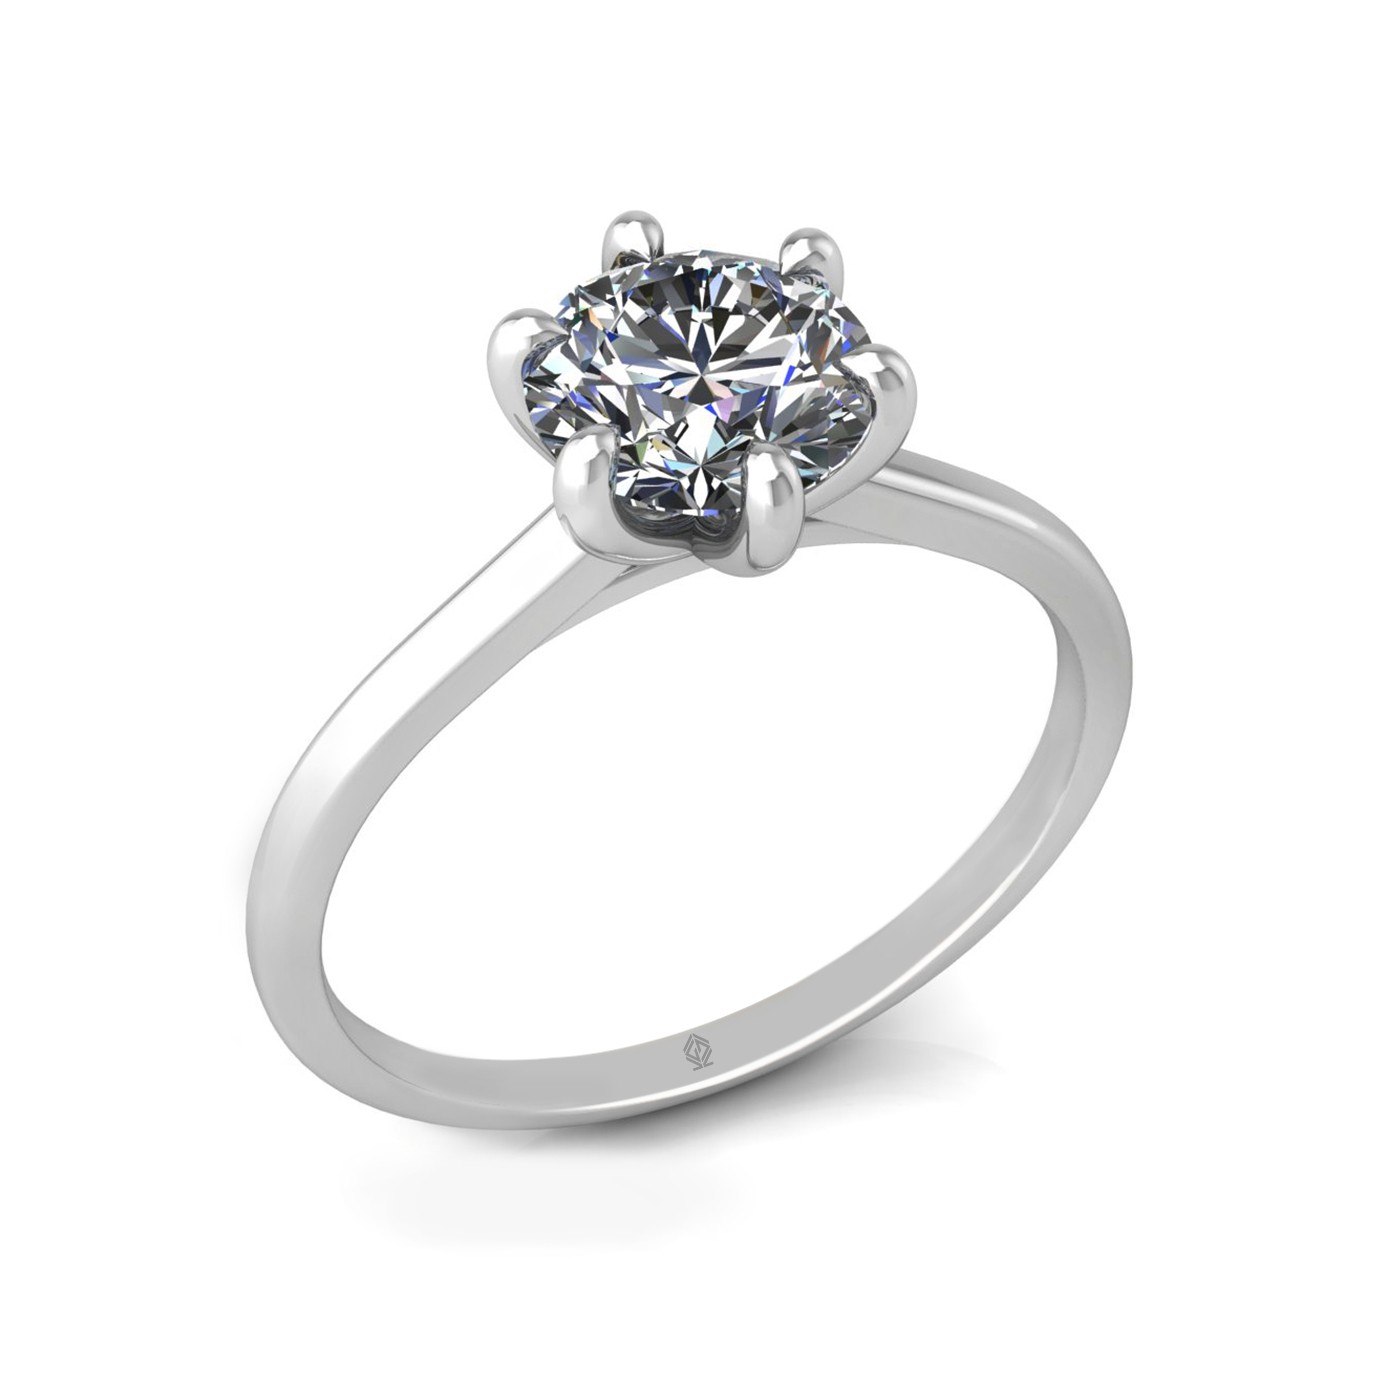 18k white gold 1,00 ct 6 prongs solitaire round cut diamond engagement ring with whisper thin band